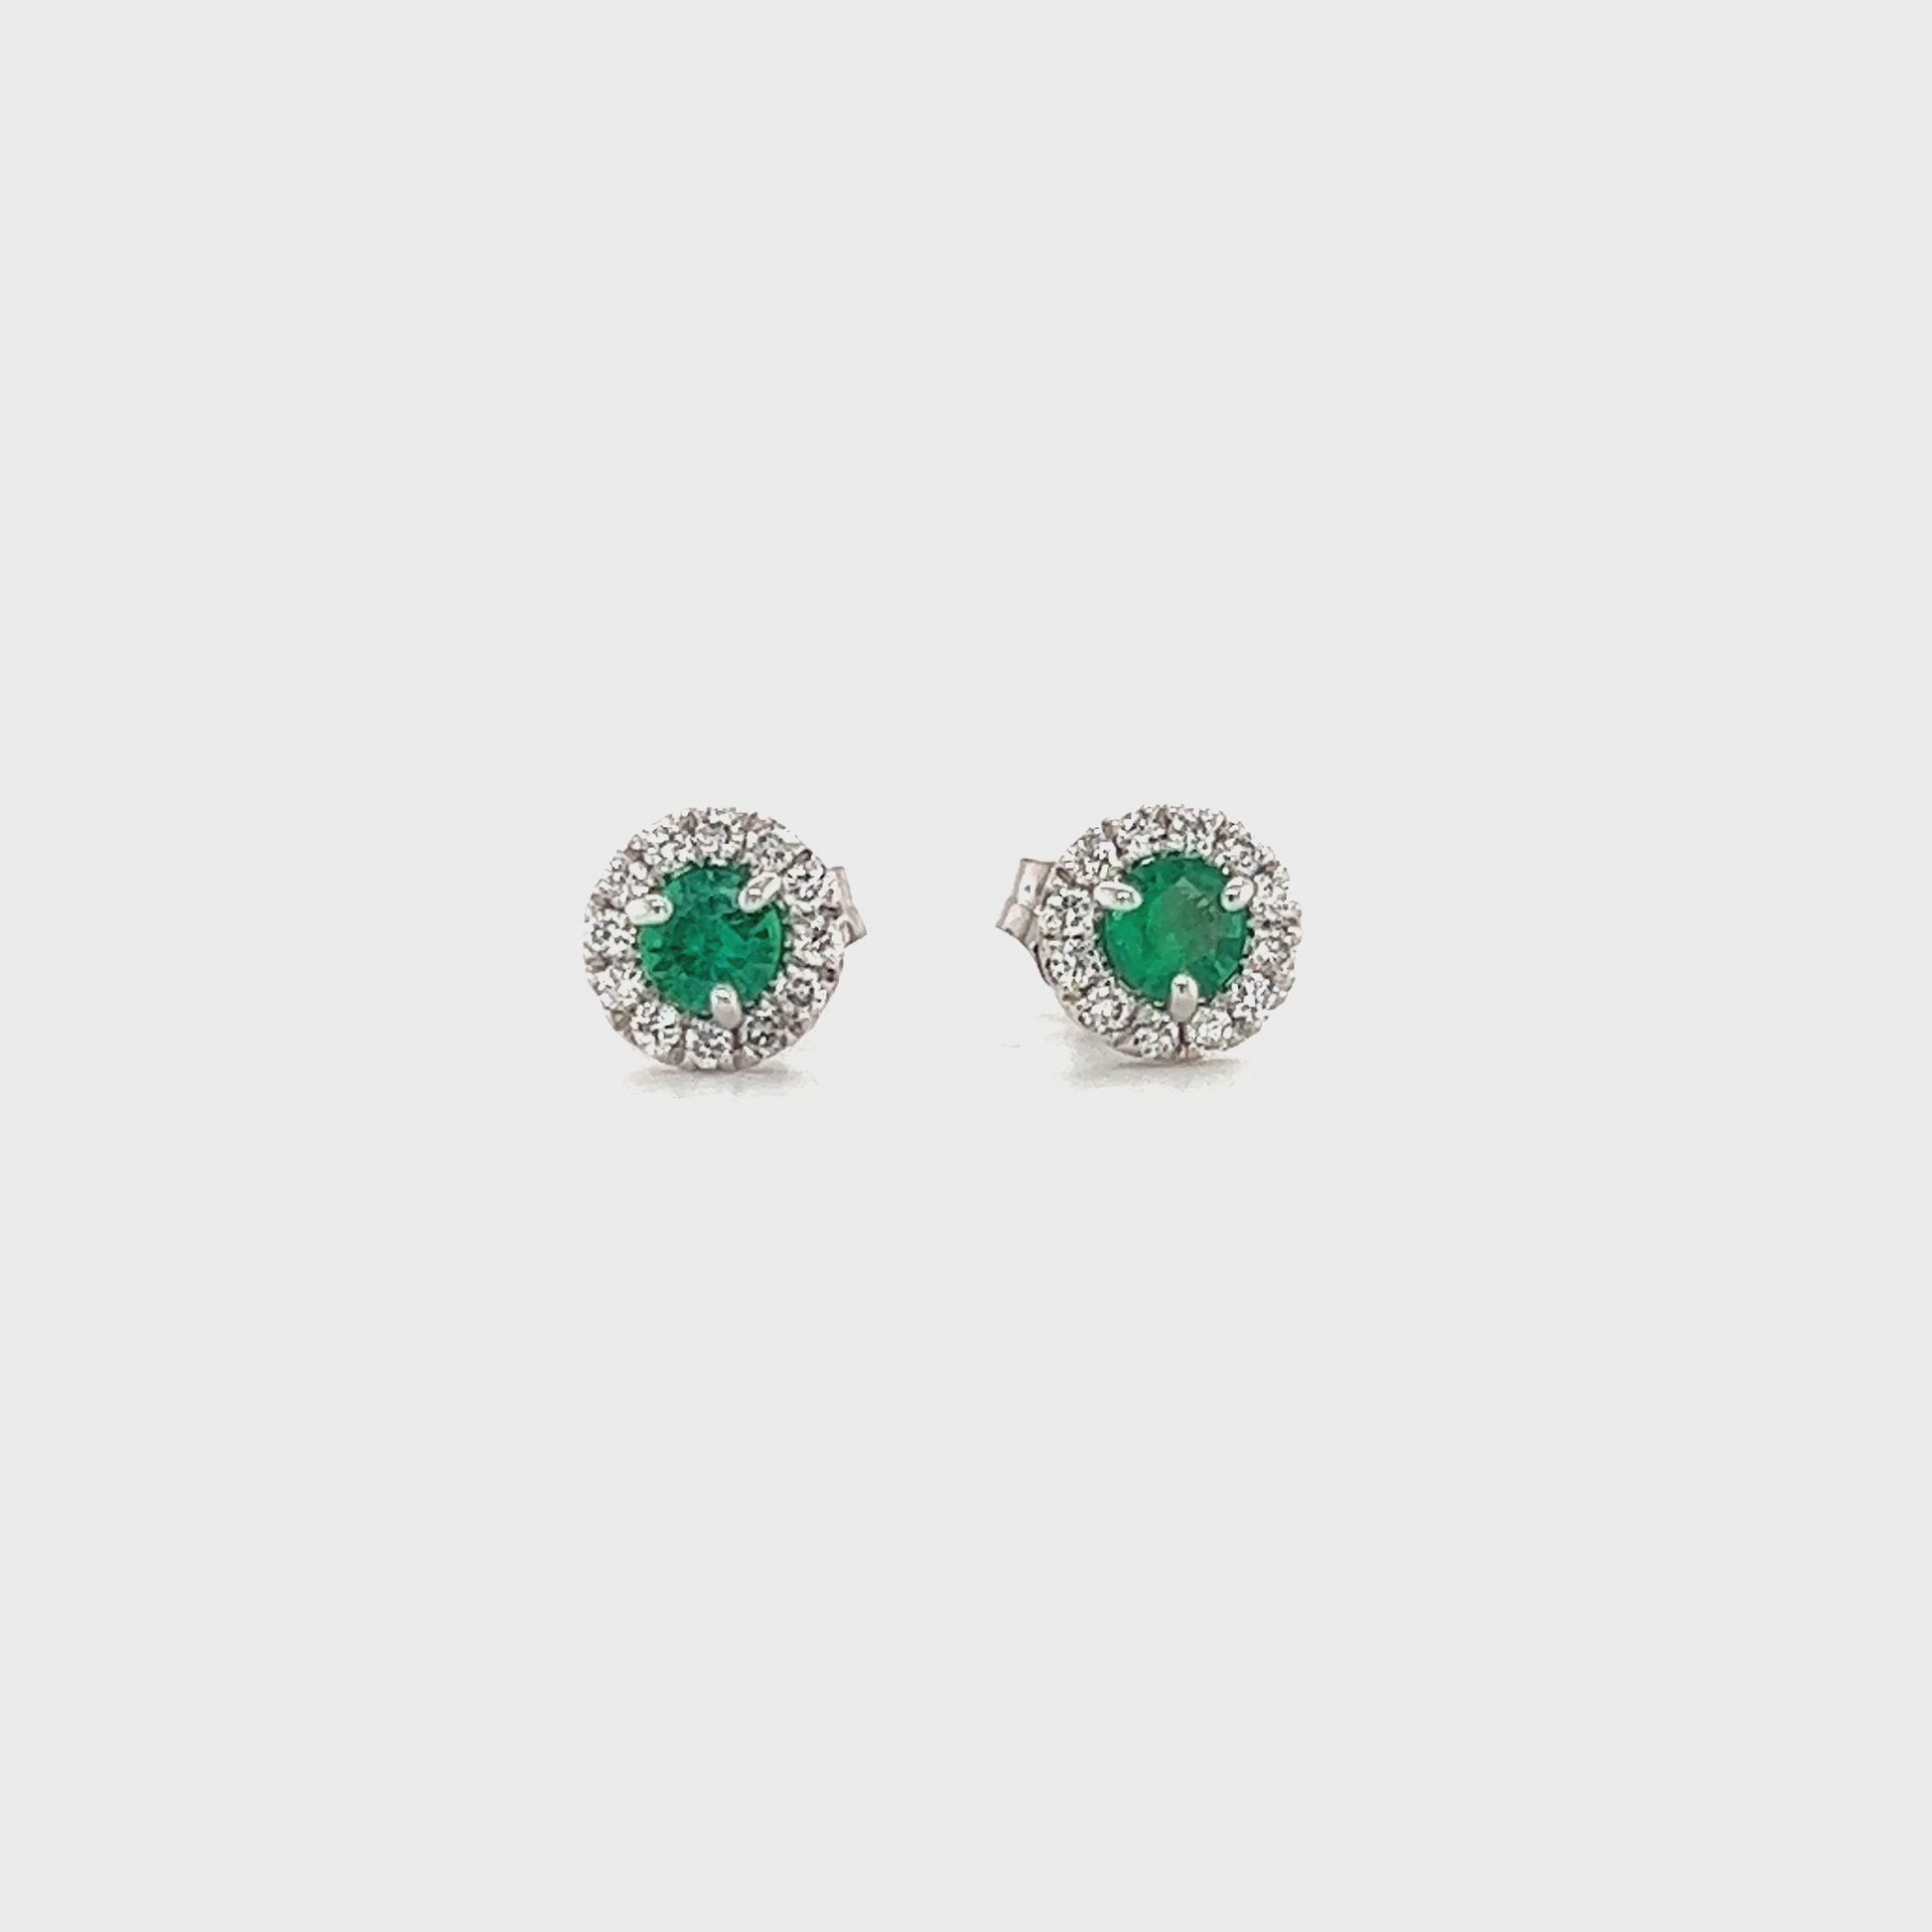 Round Emerald Stud Earrings with Diamond Halo in 14K White Gold Video